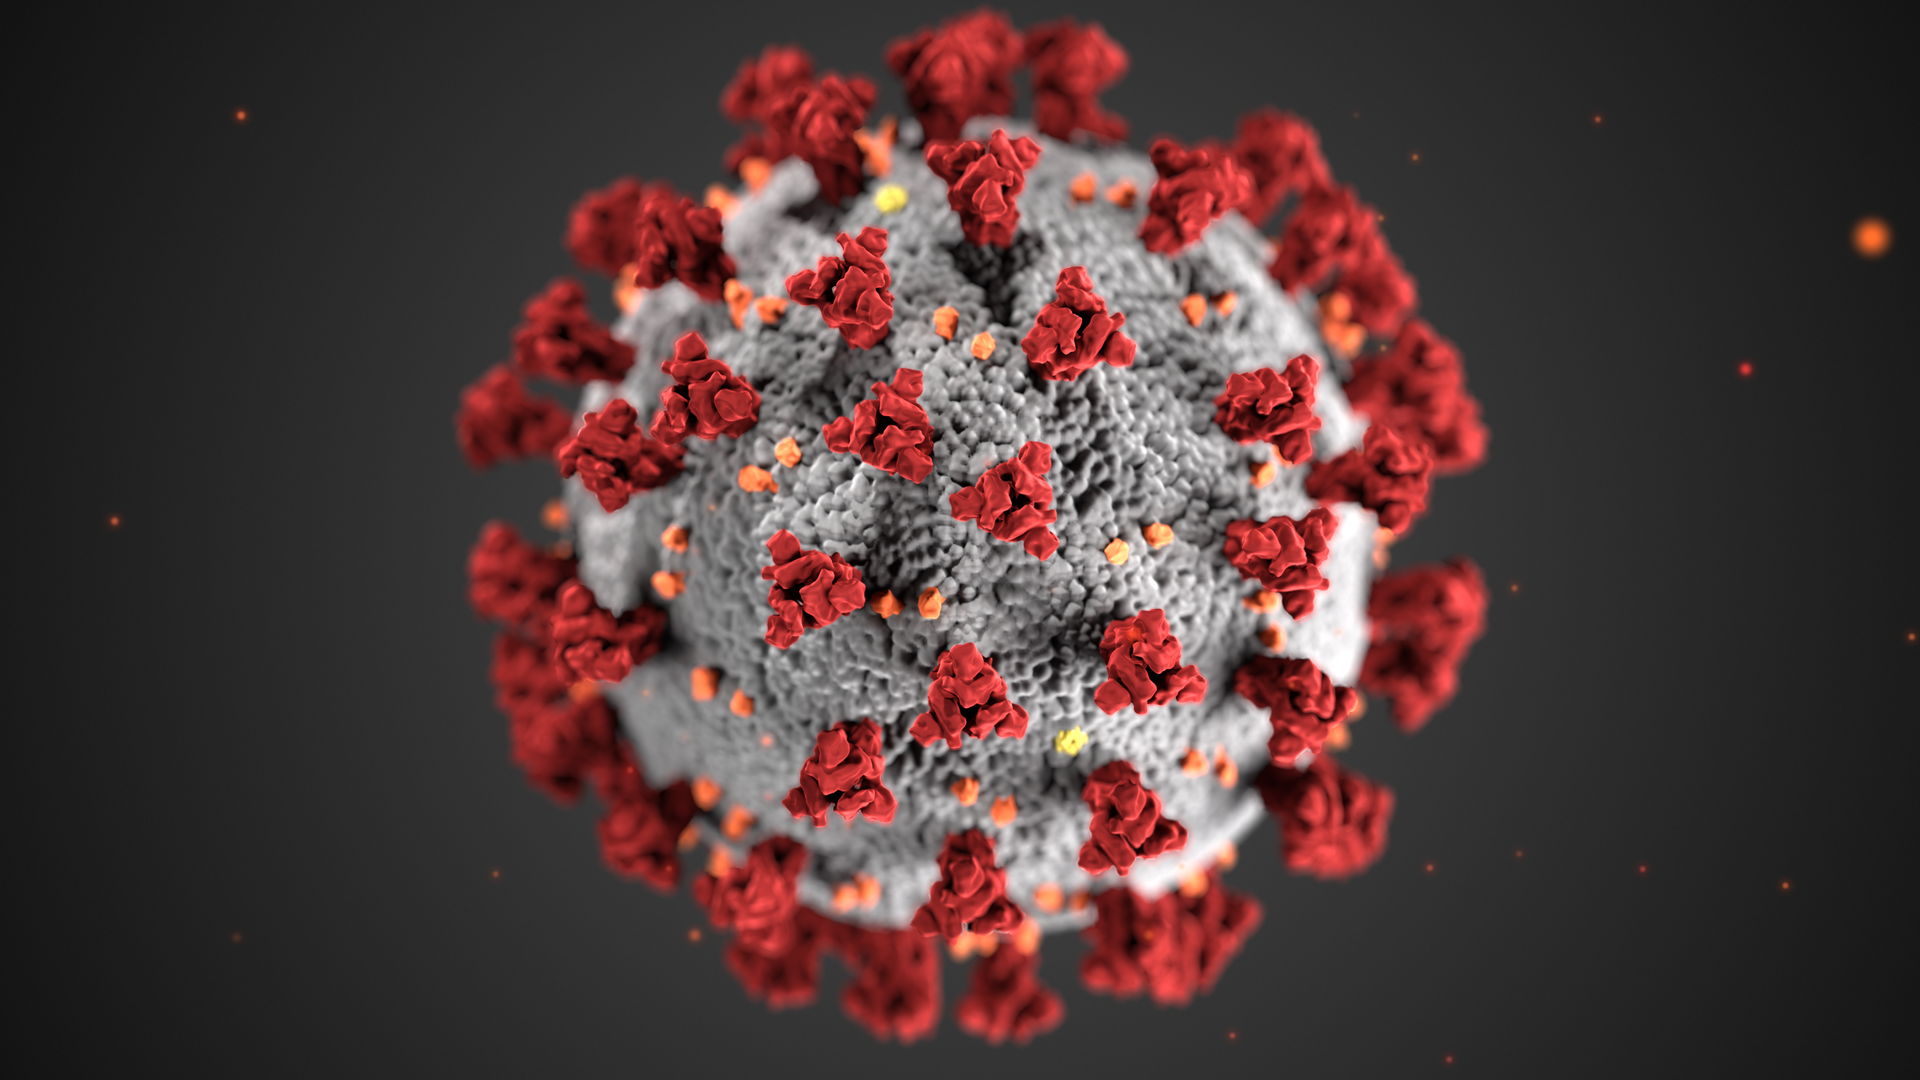 This illustration, created at the Centers for Disease Control and Prevention (CDC), reveals ultrastructural morphology exhibited by coronaviruses. Note the spikes that adorn the outer surface of the virus, which impart the look of a corona surrounding the virion, when viewed electron microscopically. A novel coronavirus, named Severe Acute Respiratory Syndrome coronavirus 2 (SARS-CoV-2), was identified as the cause of an outbreak of respiratory illness first detected in Wuhan, China in 2019. The illness caused by this virus has been named coronavirus disease 2019 (COVID-19). - Sputnik International, 1920, 27.11.2021